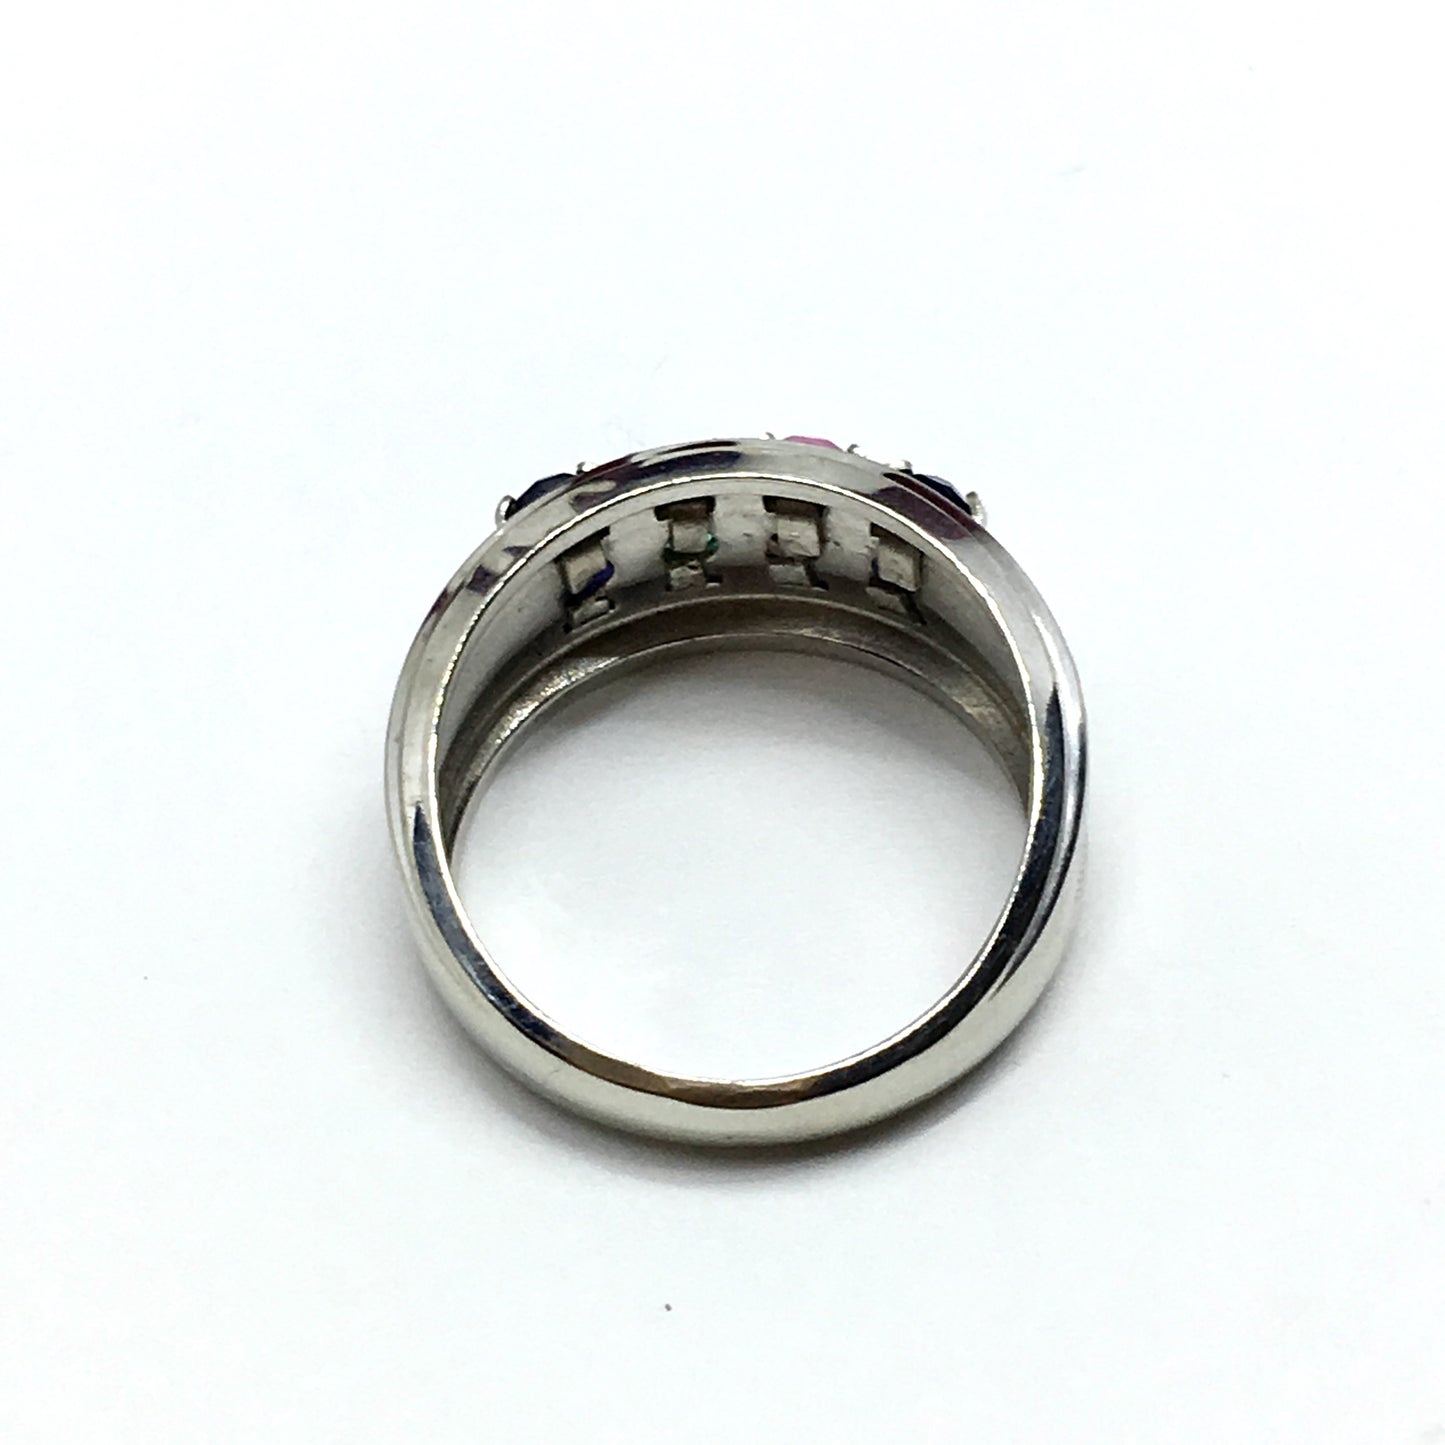 Vintage Jewelry | 10k White Gold Removeable Setting Design Family Birthstone Mothers Band Ring